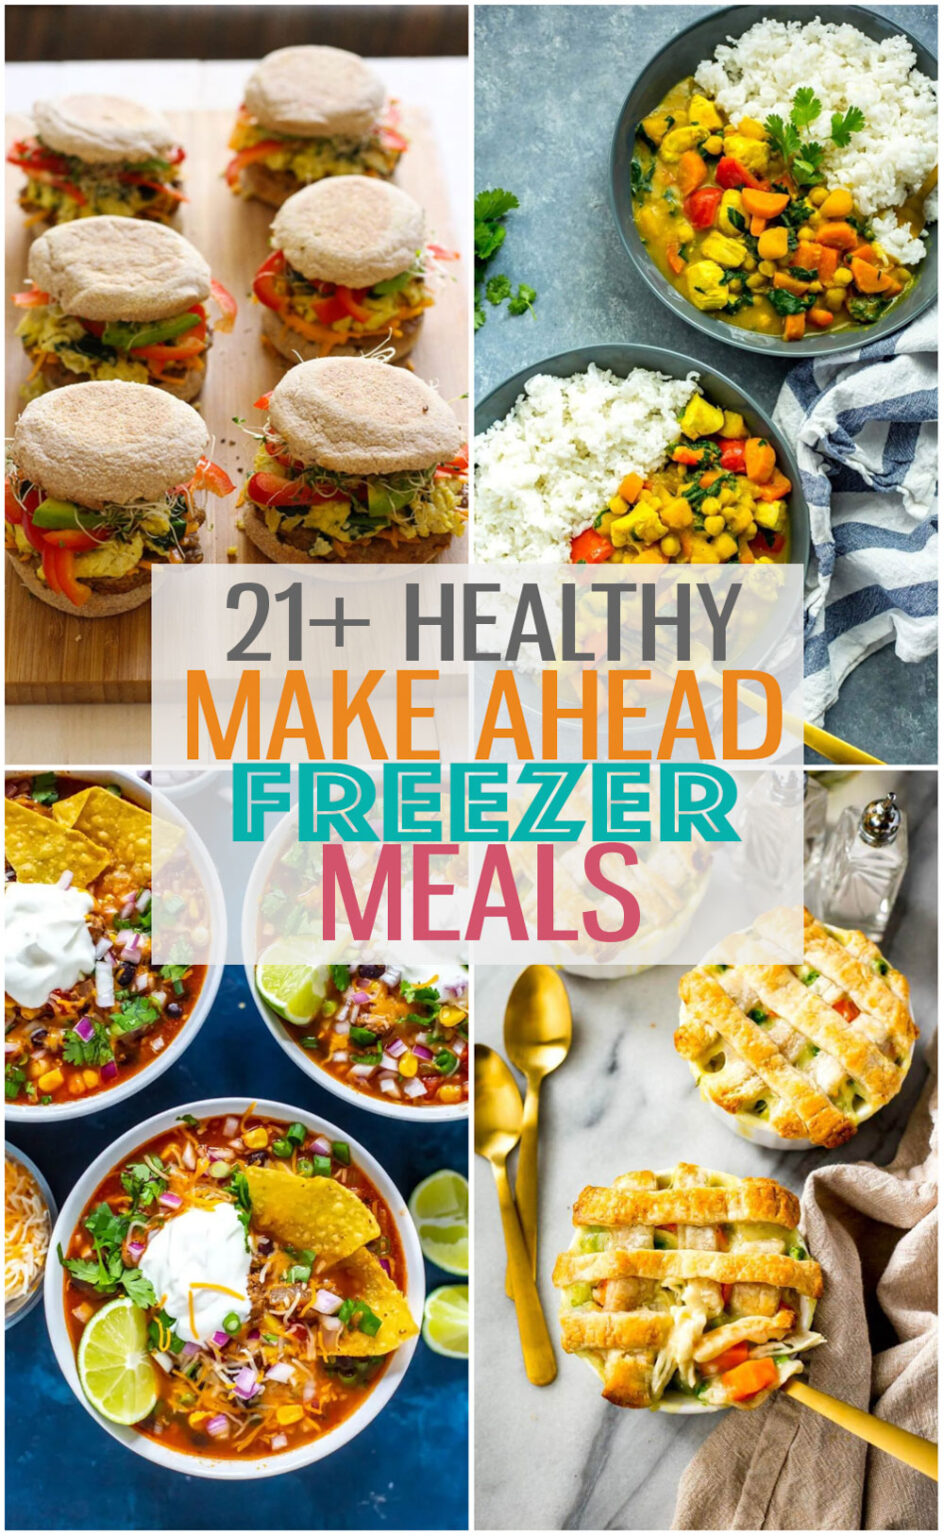 21+ Healthy Make Ahead Freezer Meals for Busy Weeknights - The Girl on ...